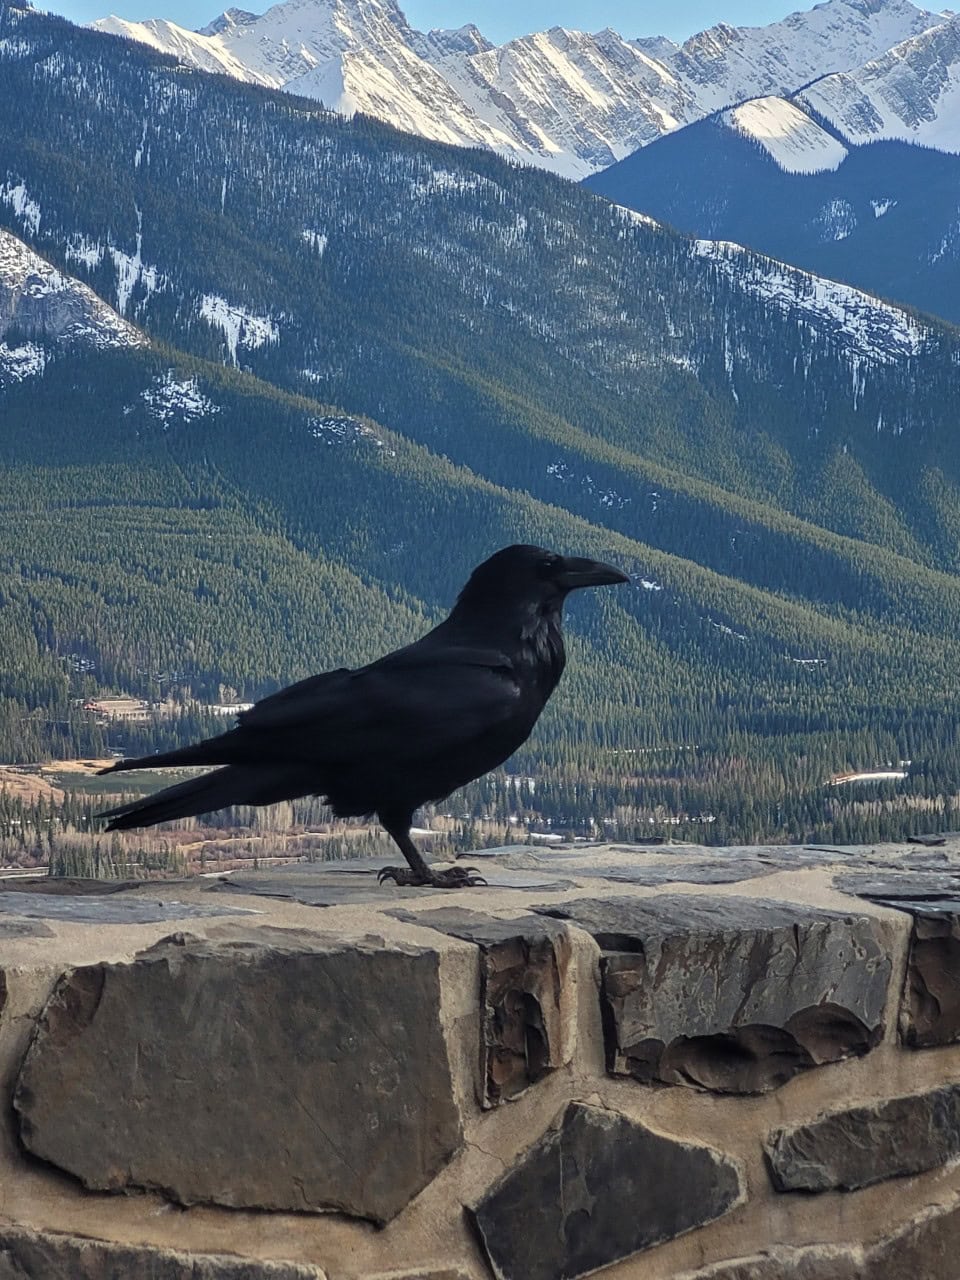 Black Raven - Banff Alberta Canada - This BIG black Raven was quite the character as he photobombed several peoples photos at the Mount Norquay Lookout Point.
Banff, Alberta, Canada
